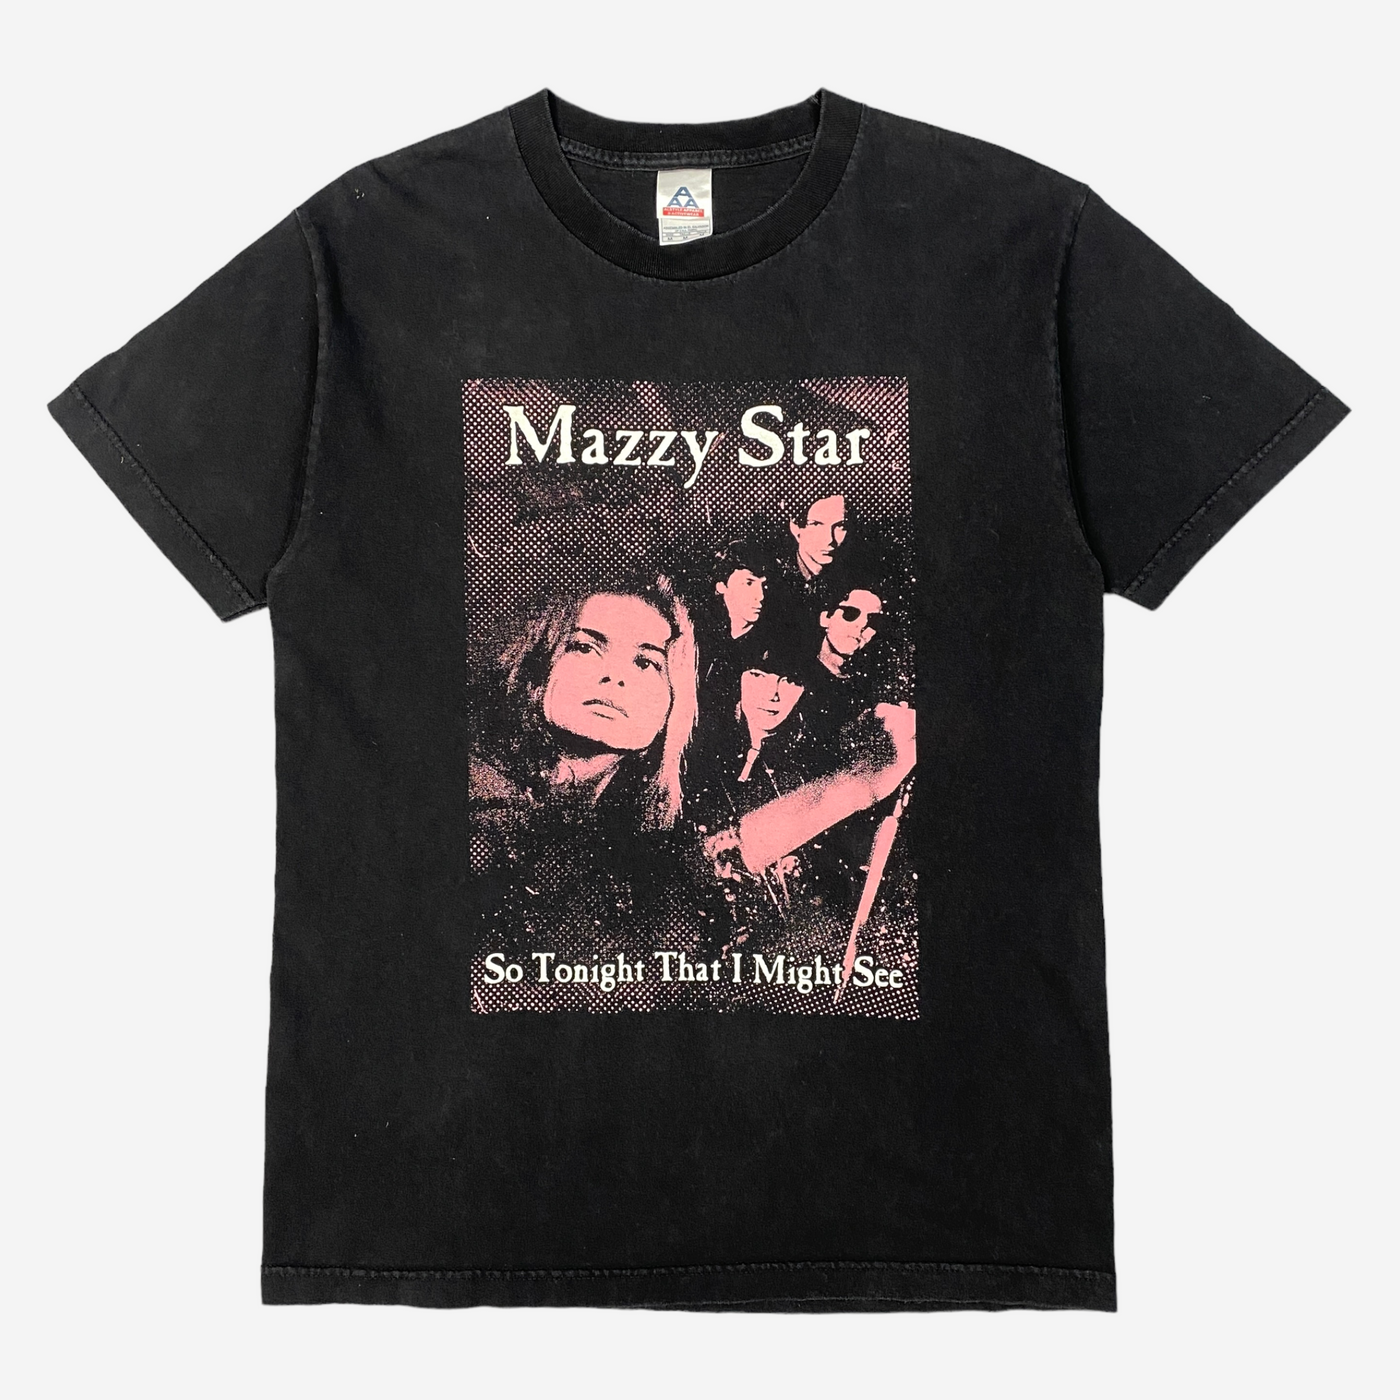 EARLY 00s MAZZY STAR T-SHIRT